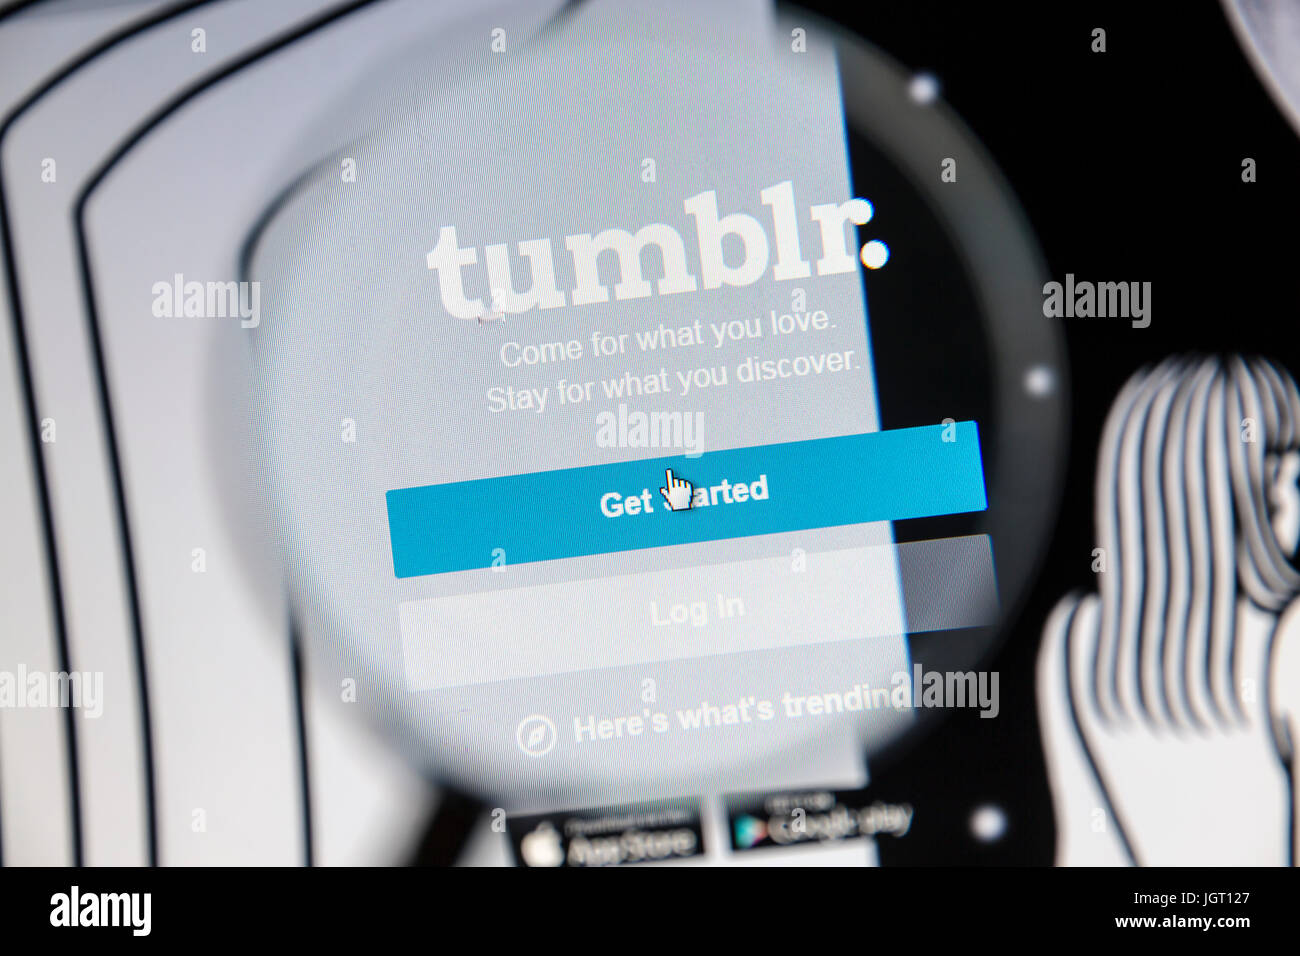 Tumblr website under a magnifying glass. Tumblr is a microblogging platform and social networking website. Stock Photo